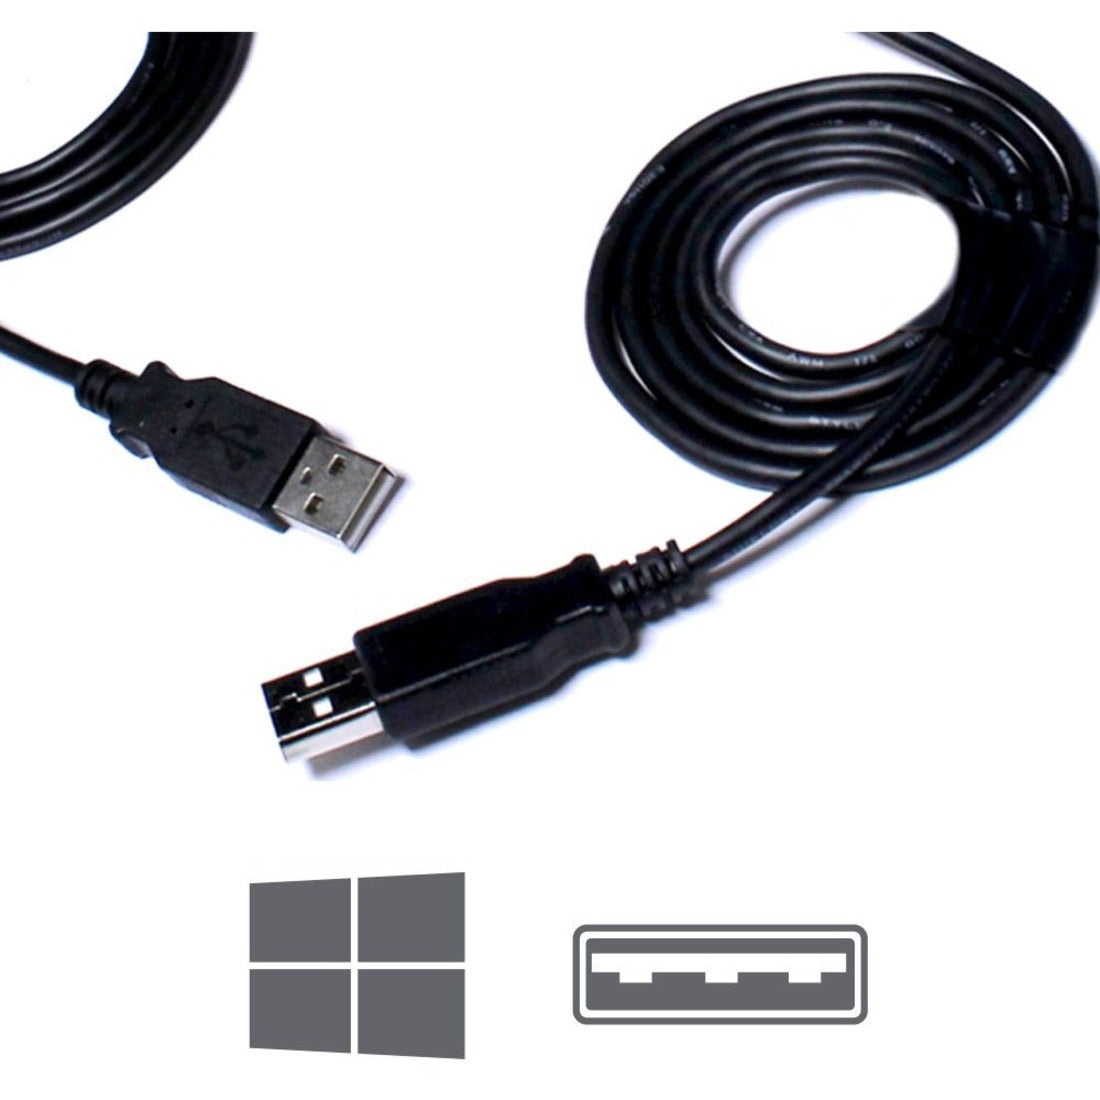 Plugable USB-EASY-TRAN USB 2.0 Windows Transfer Cable, Unlimited Use, Easy Data Transfer Between 2 PCs